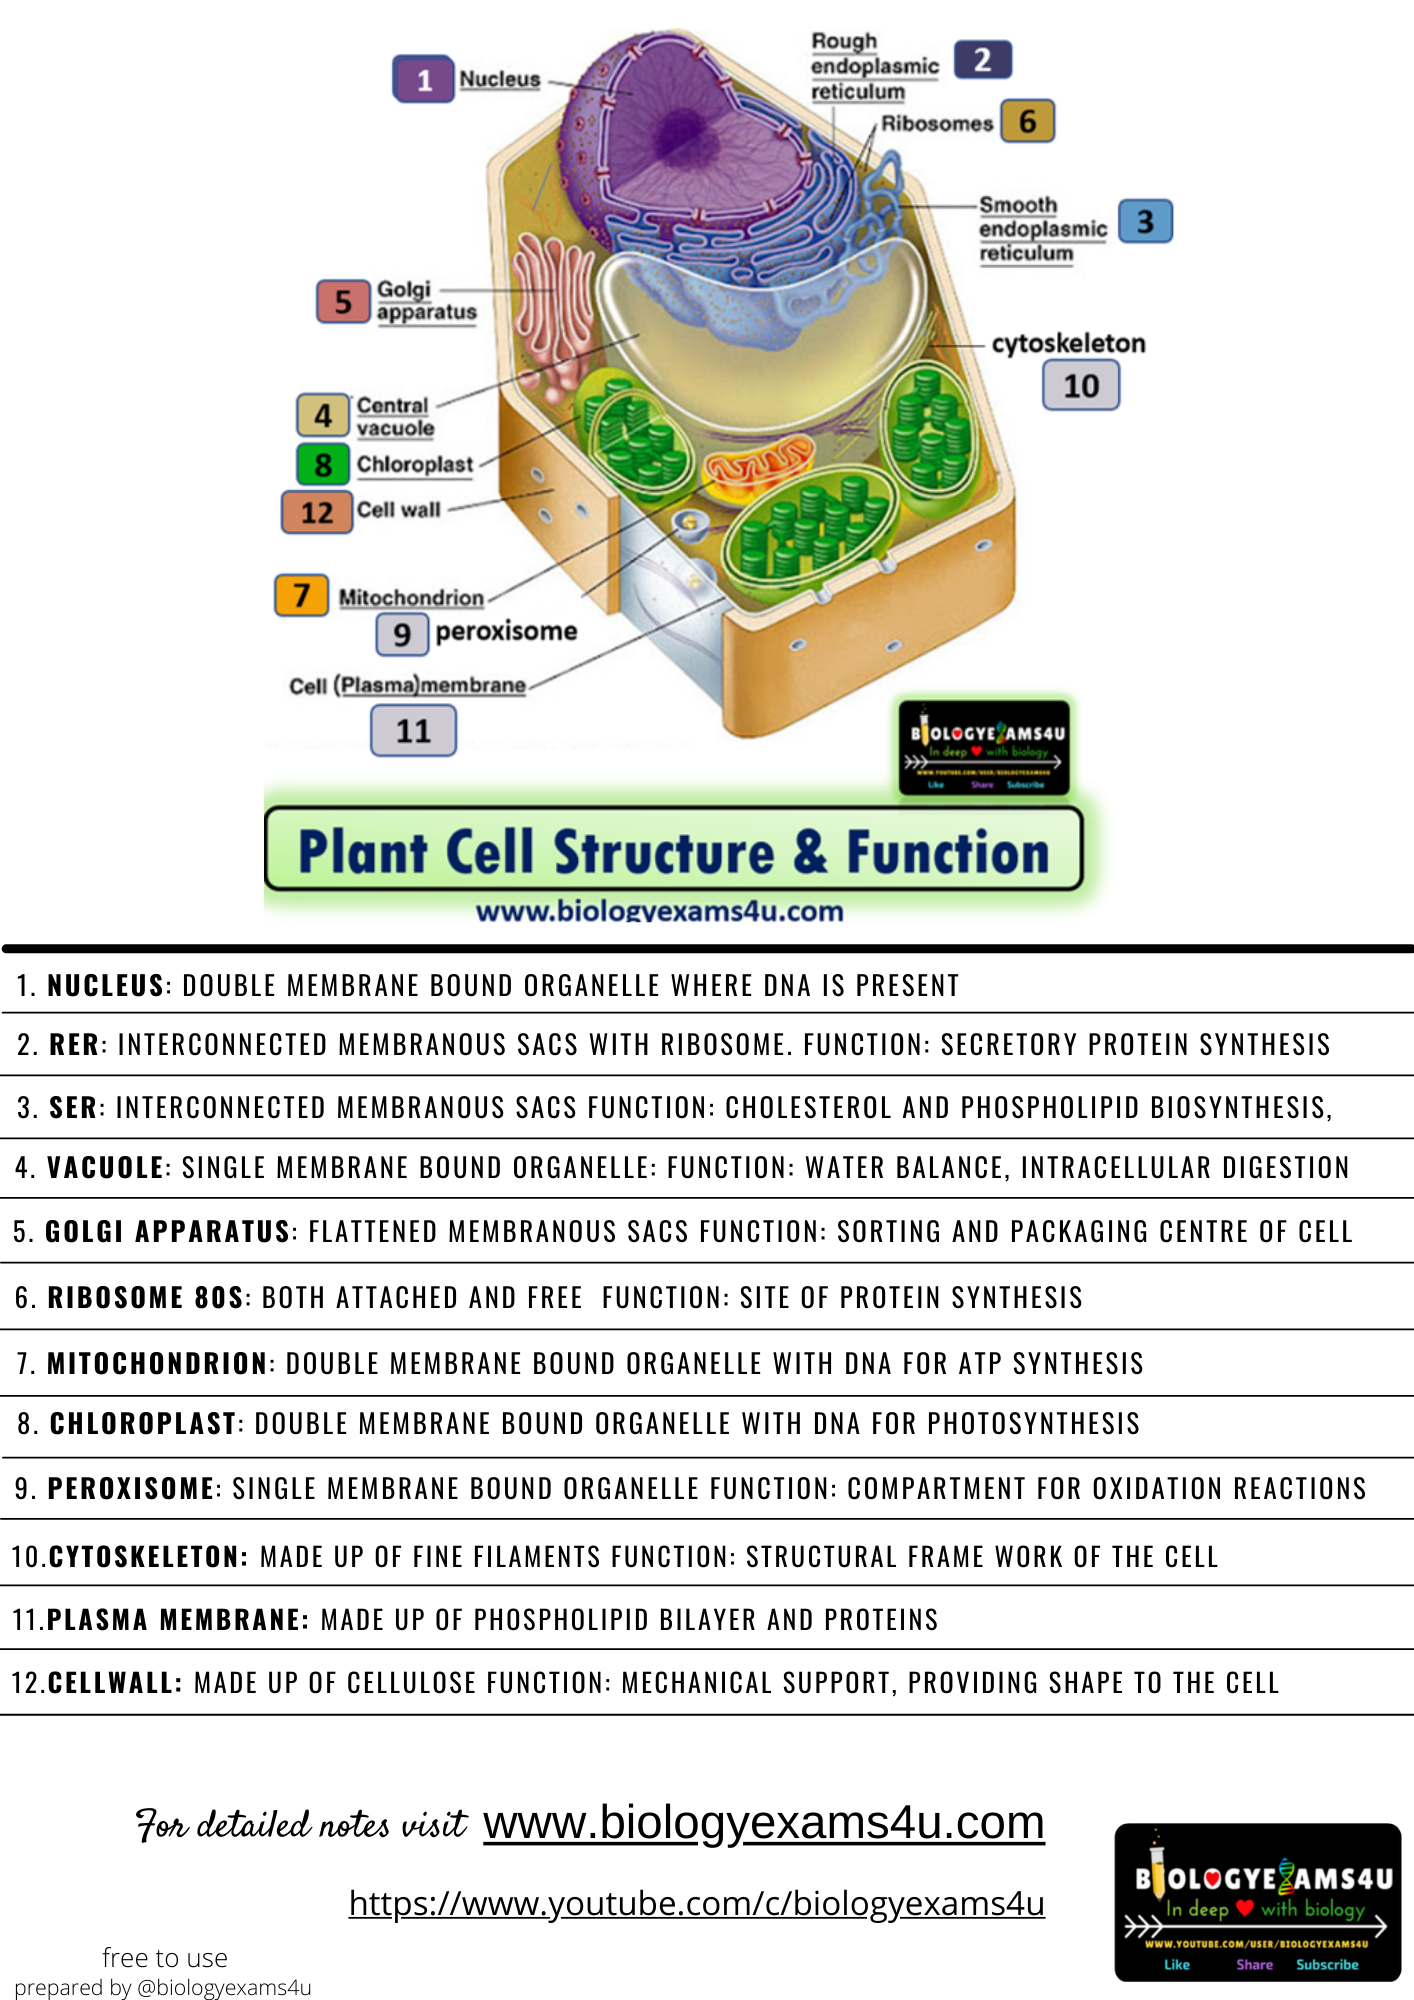 Plant Cell Structure and Function PDF notes and Poster